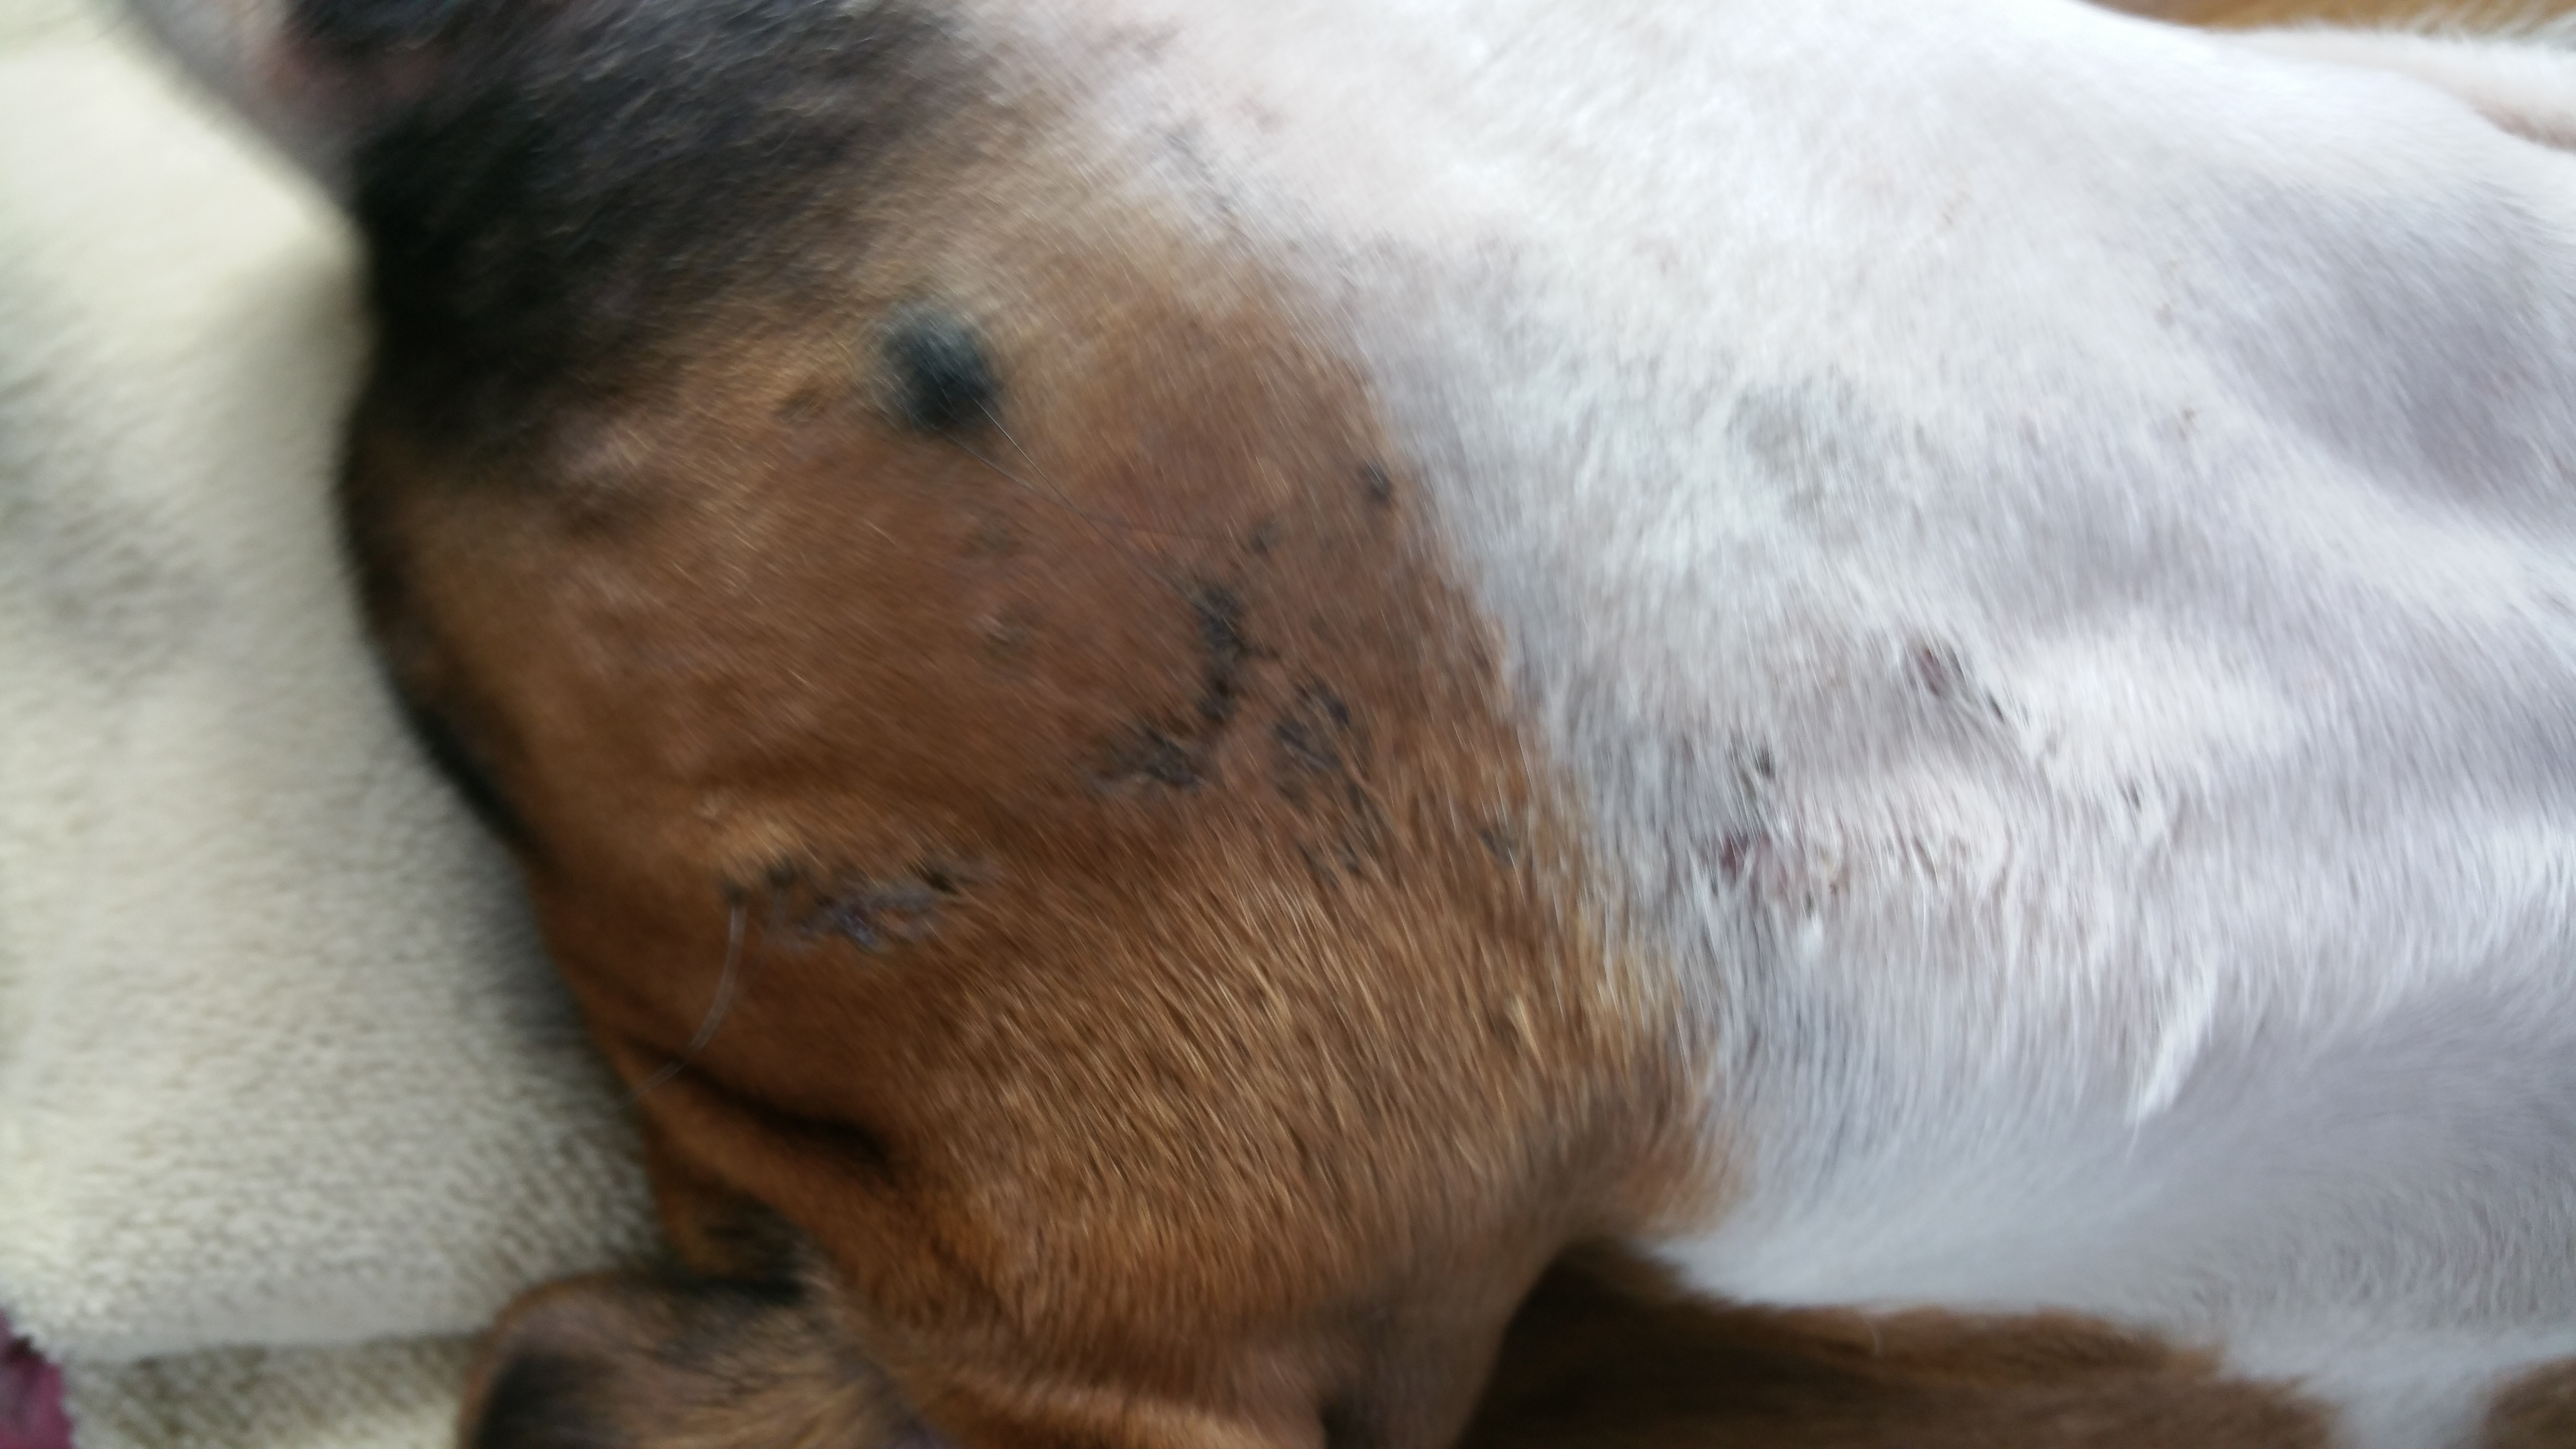 Only one of the many markings on Cane. Again, that is NOT scabbing. That is dirt that stuck on to dried up blood on an open wound which was went untreated by Voraussehen Kennels.